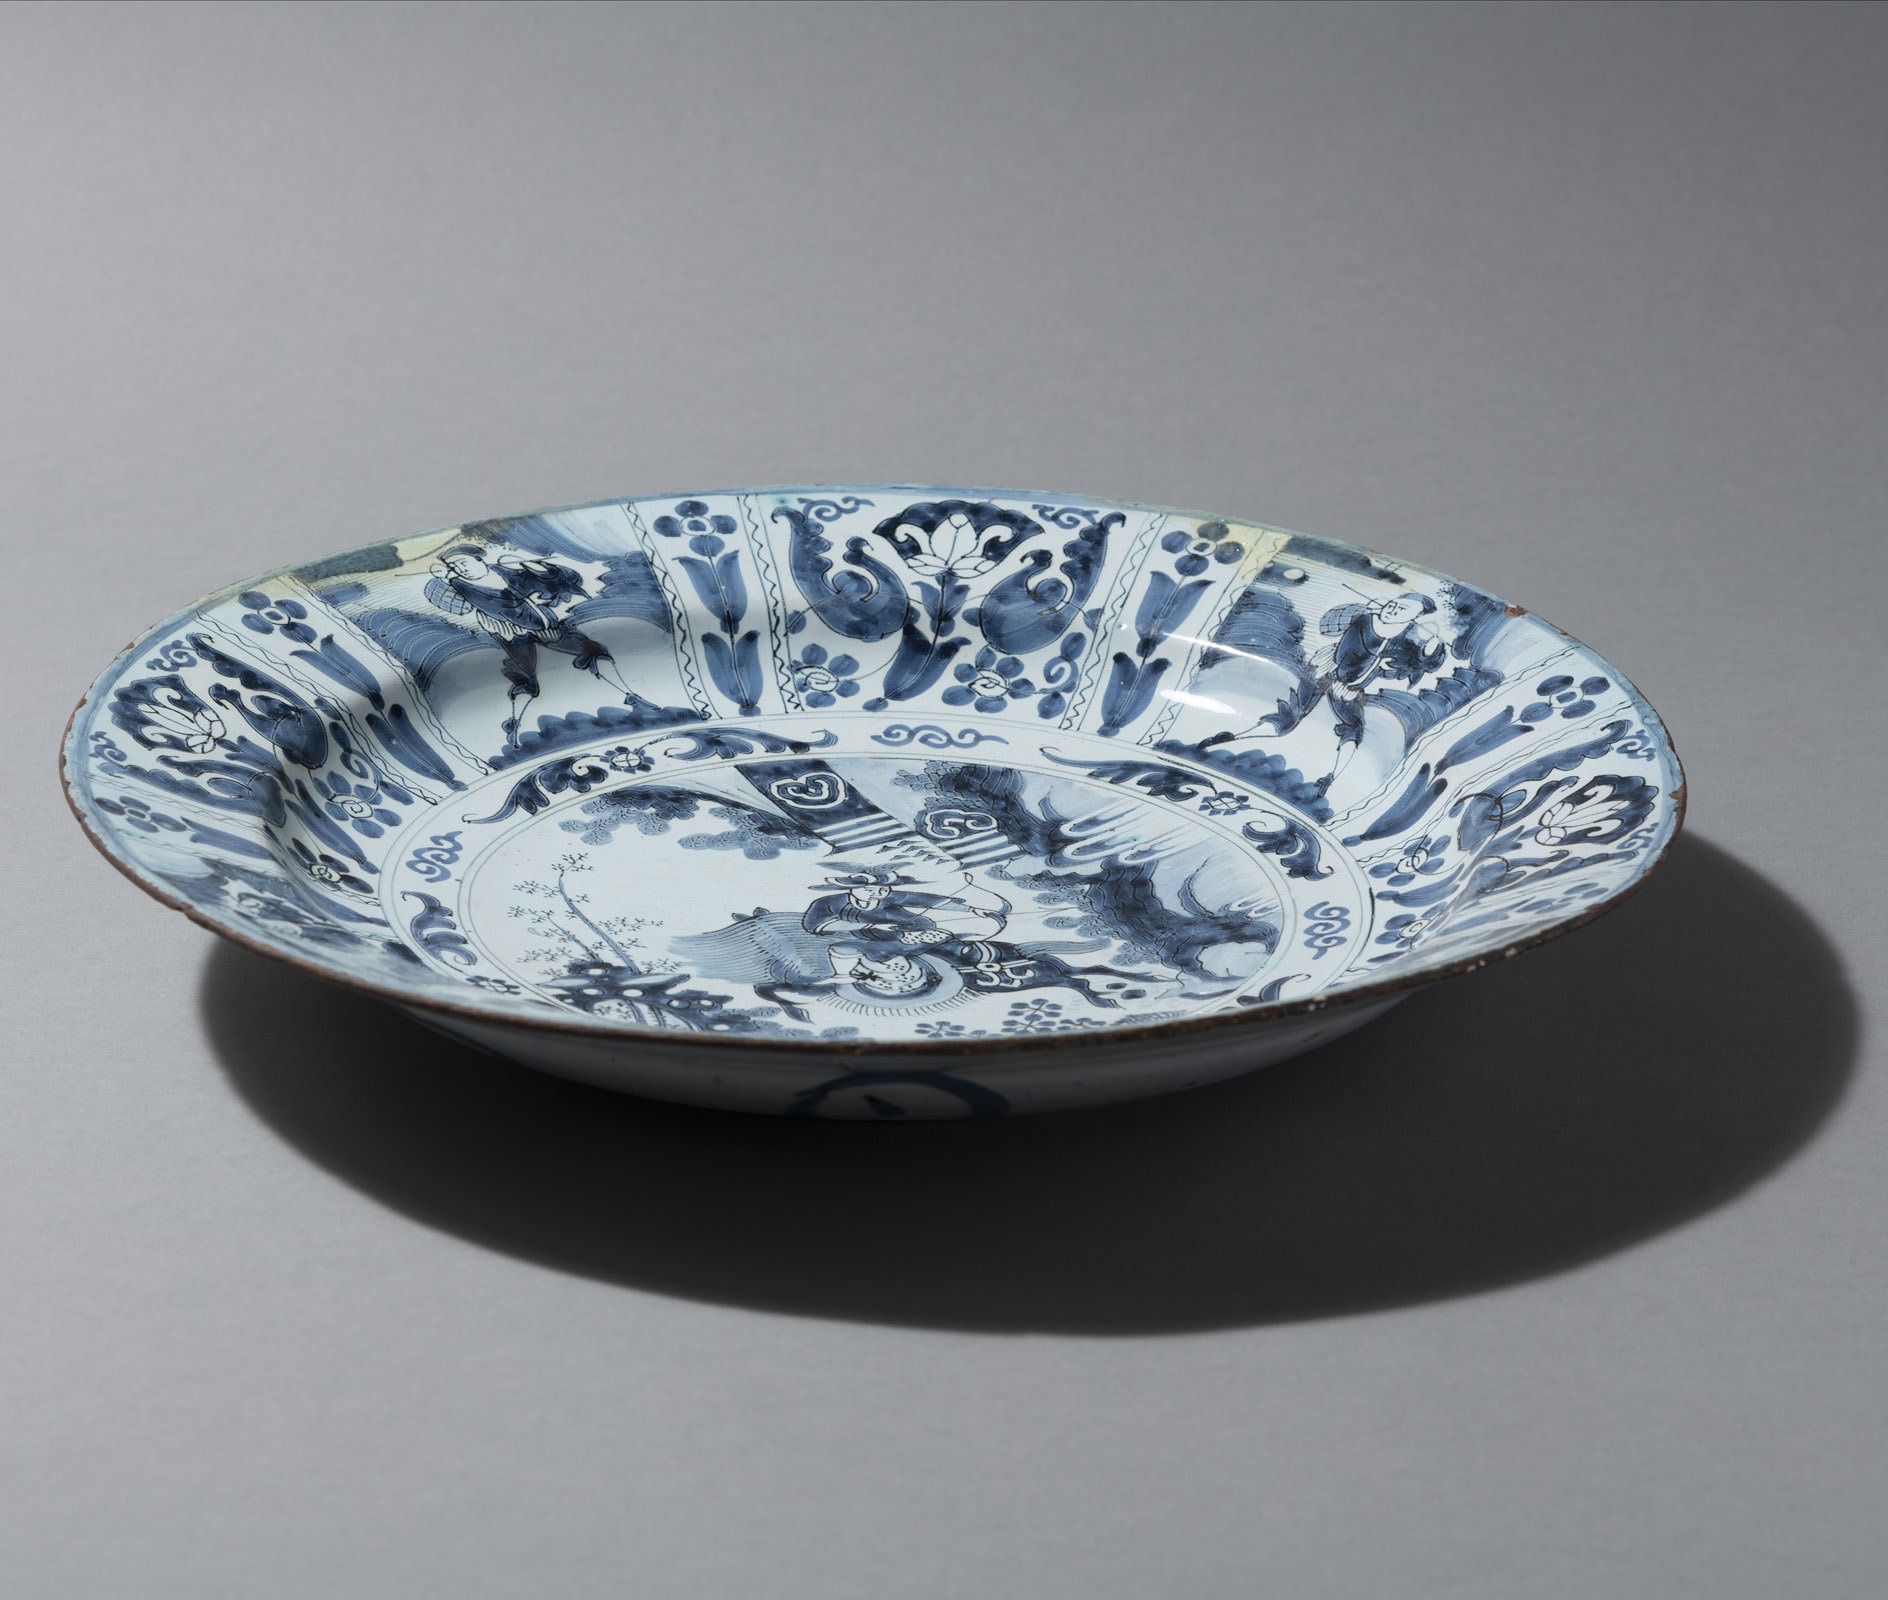 A LARGE CHINOISERIE PATTERN FAIENCE ROUND DISH - Image 2 of 3